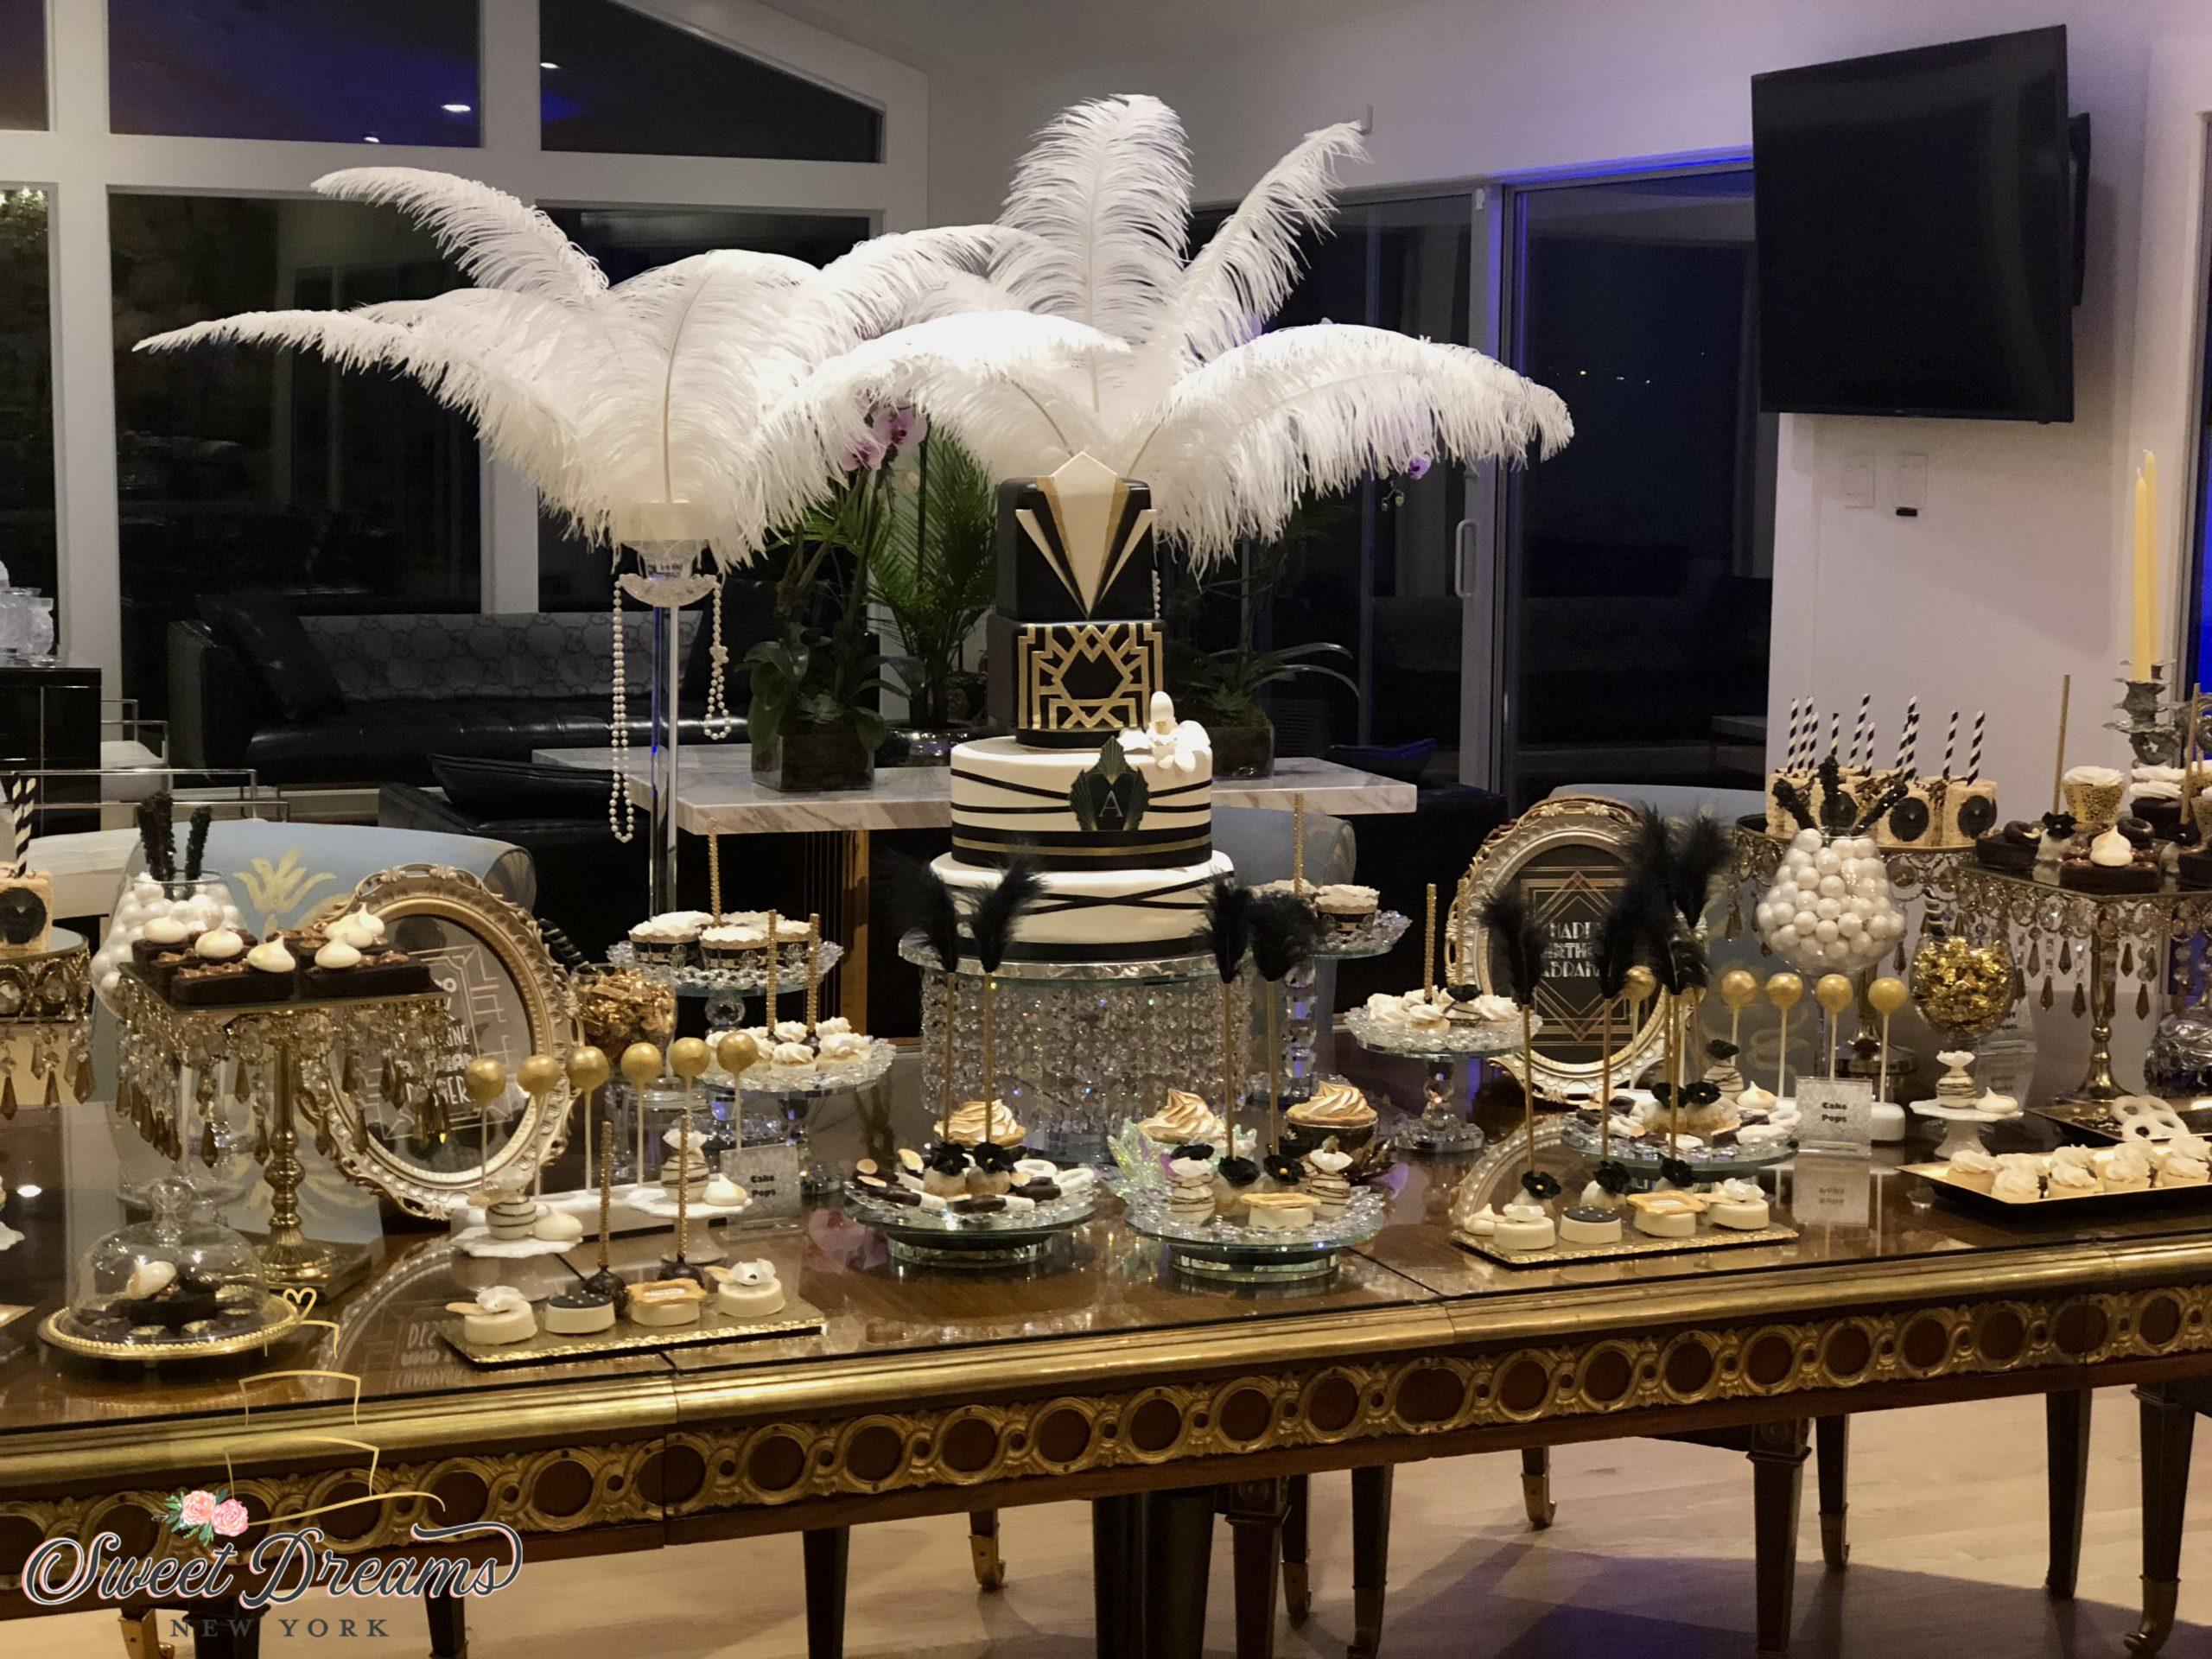 The Great Gatsby Dessert Table 40th Birthday Bridal Shower Sweet Table NYC Long Island